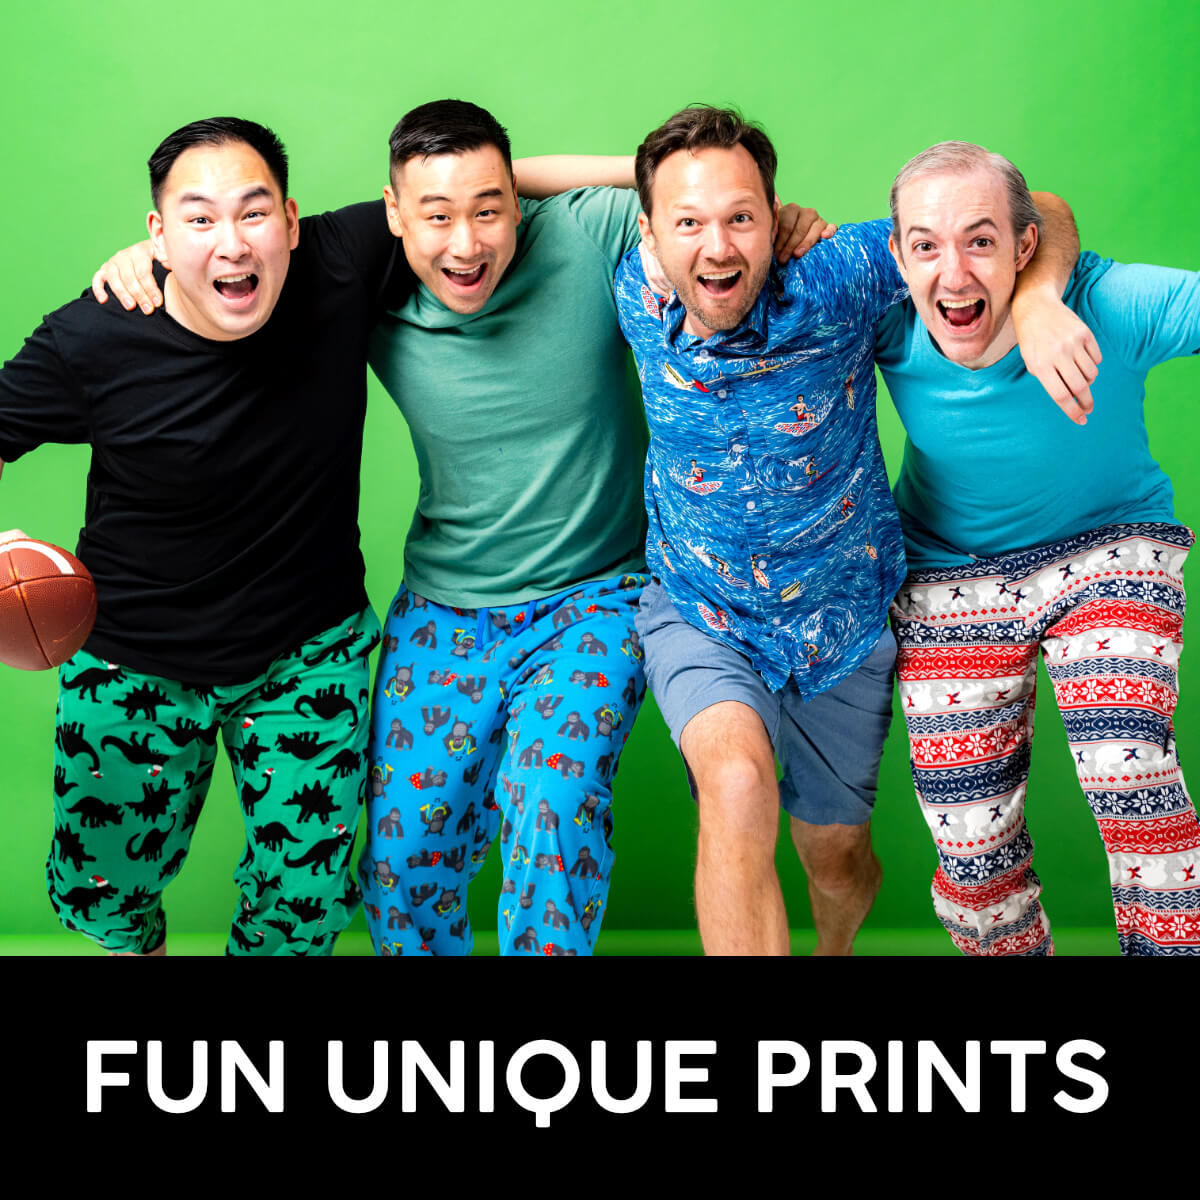 We have all sorts of fun animal prints in our mens lounge pants, including crocodile prints, polar bear prints, shark prints, octopus prints, space prints and other wild prints. Treat your downtime to a splash of color and funky patterns!